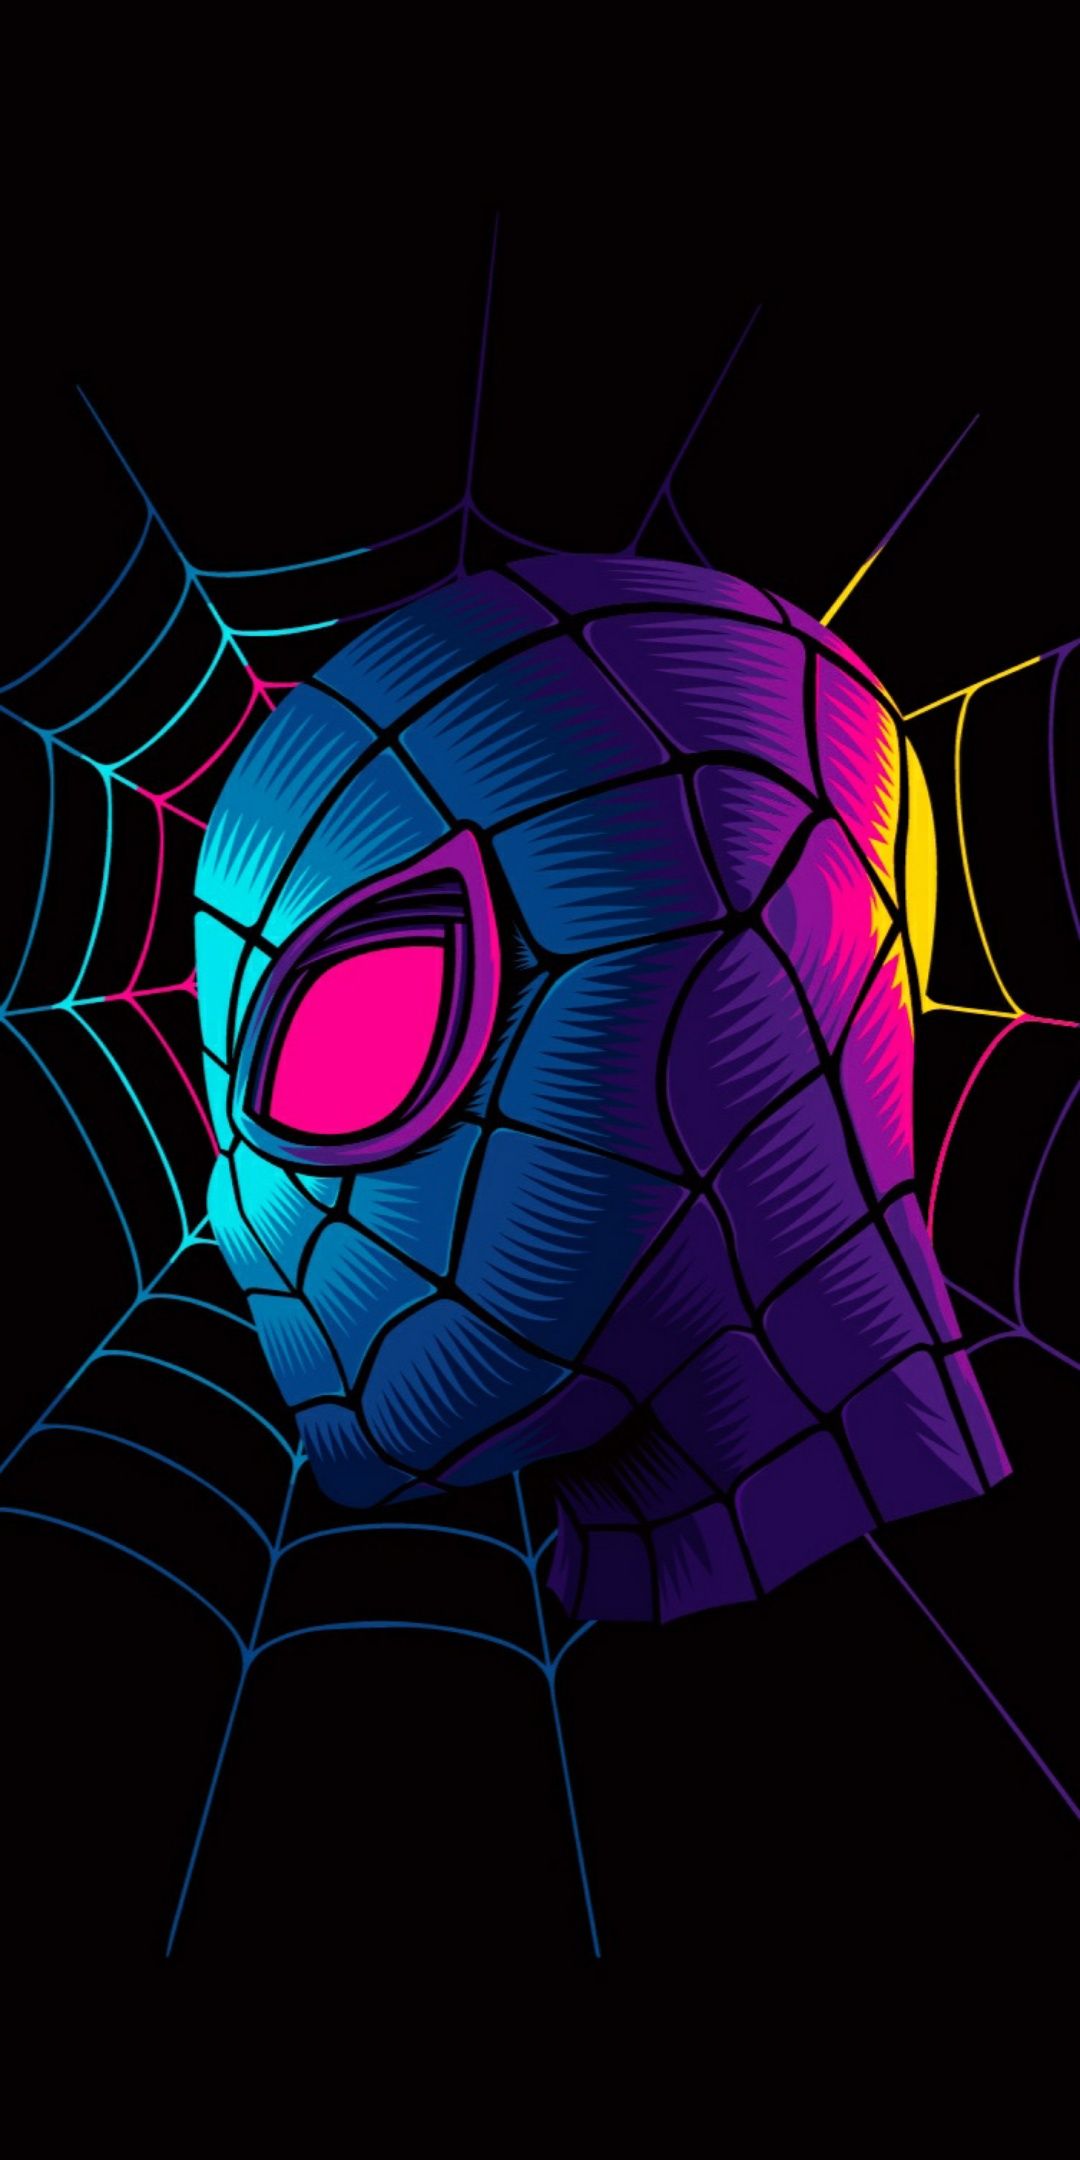 Wallpaper Share Download SuperHeroes Amoled Wallpaper For Your Smartphone